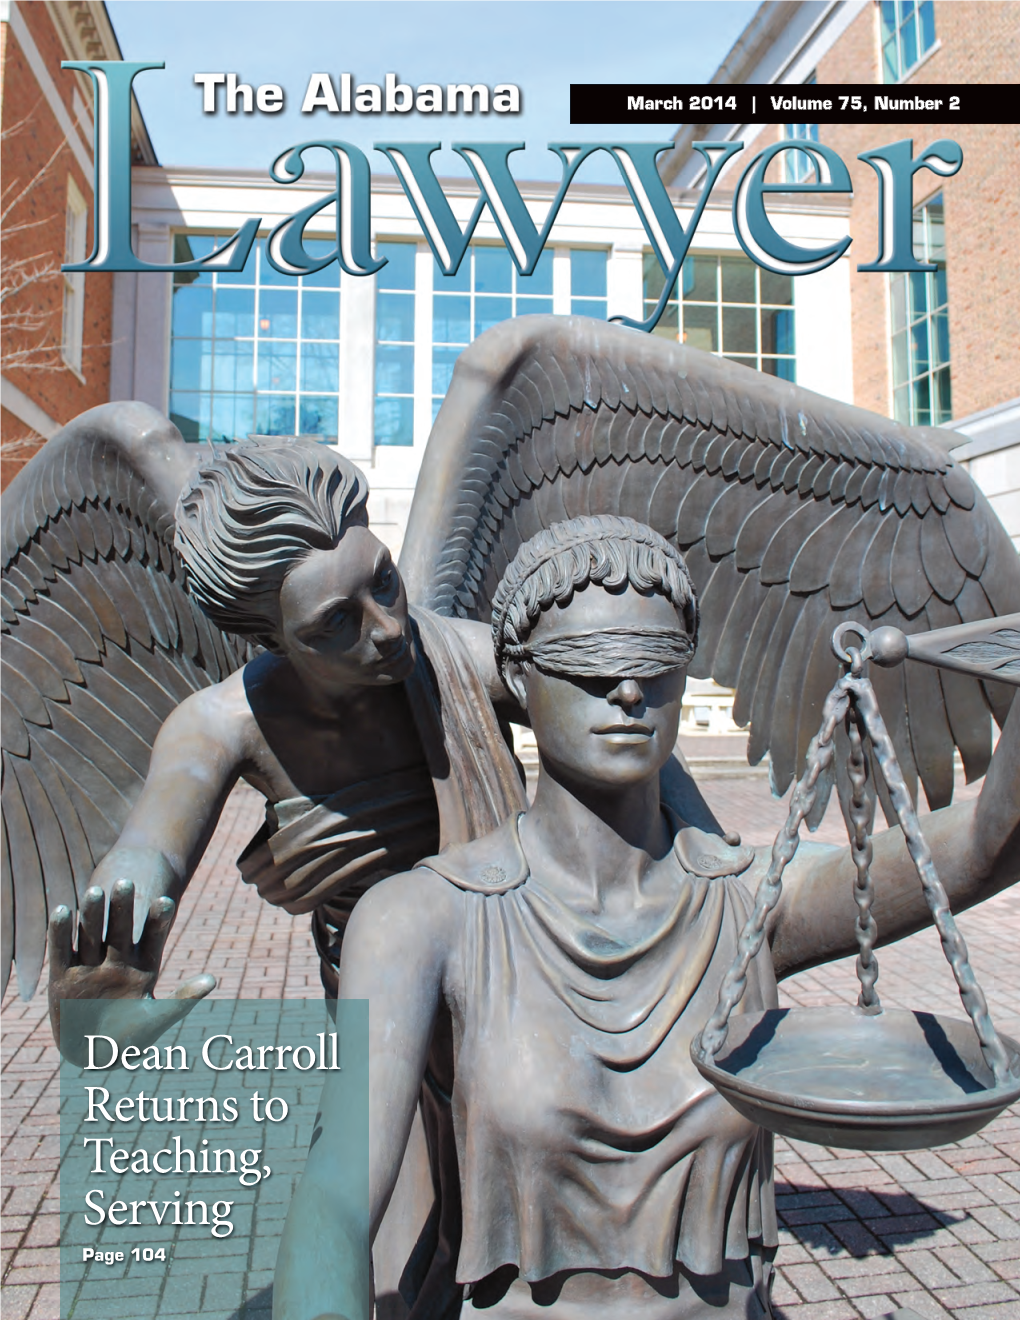 Dean Carroll Returns to Teaching, Serving Page 104 66824-1 ALABAR Lawyer 3/7/14 1:56 PM Page 86